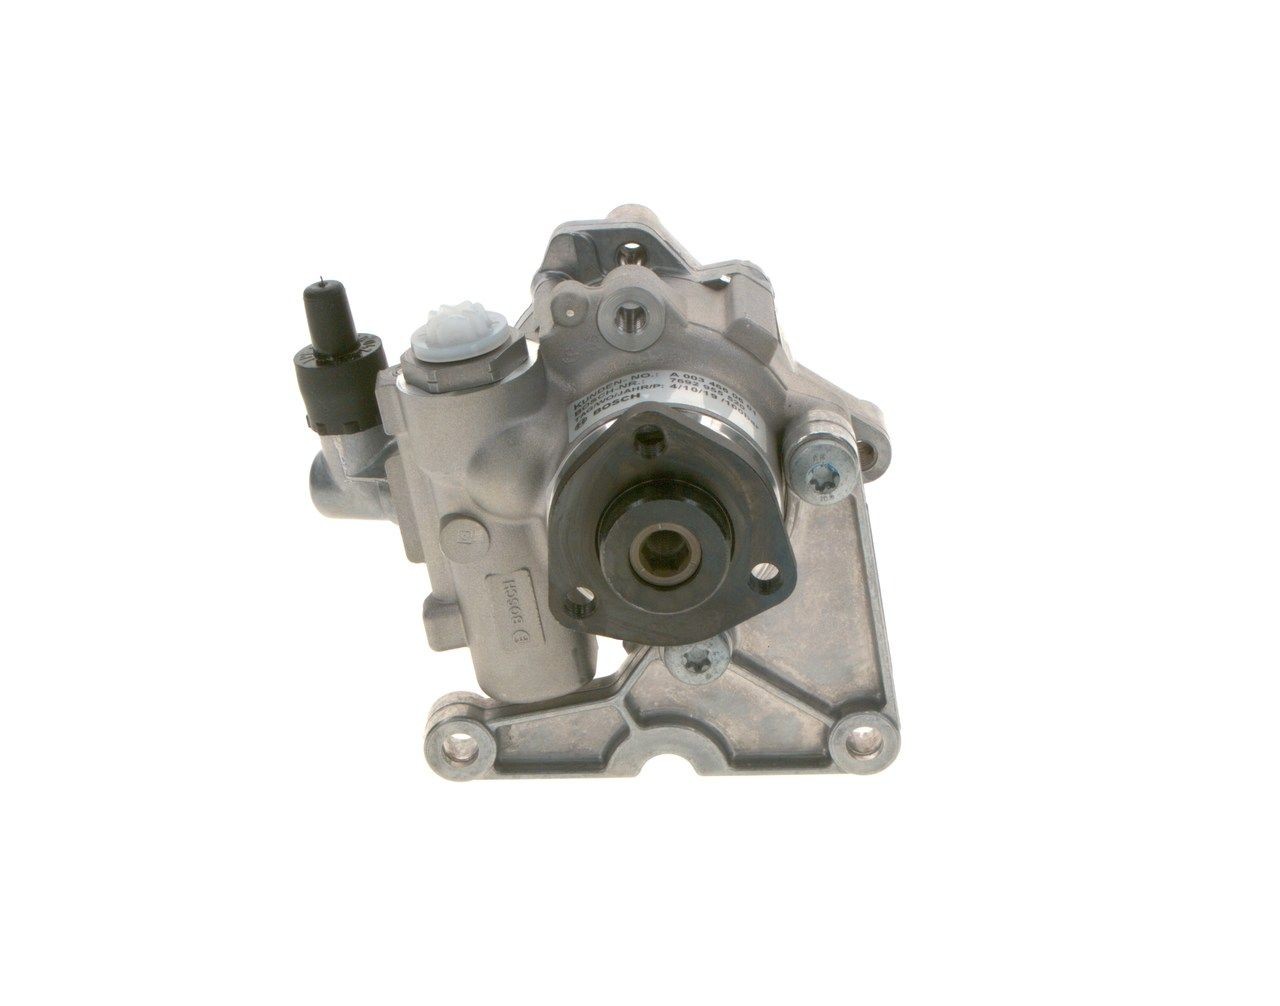 BOSCH Hydraulic steering pump K S01 000 600 suitable for ML W163